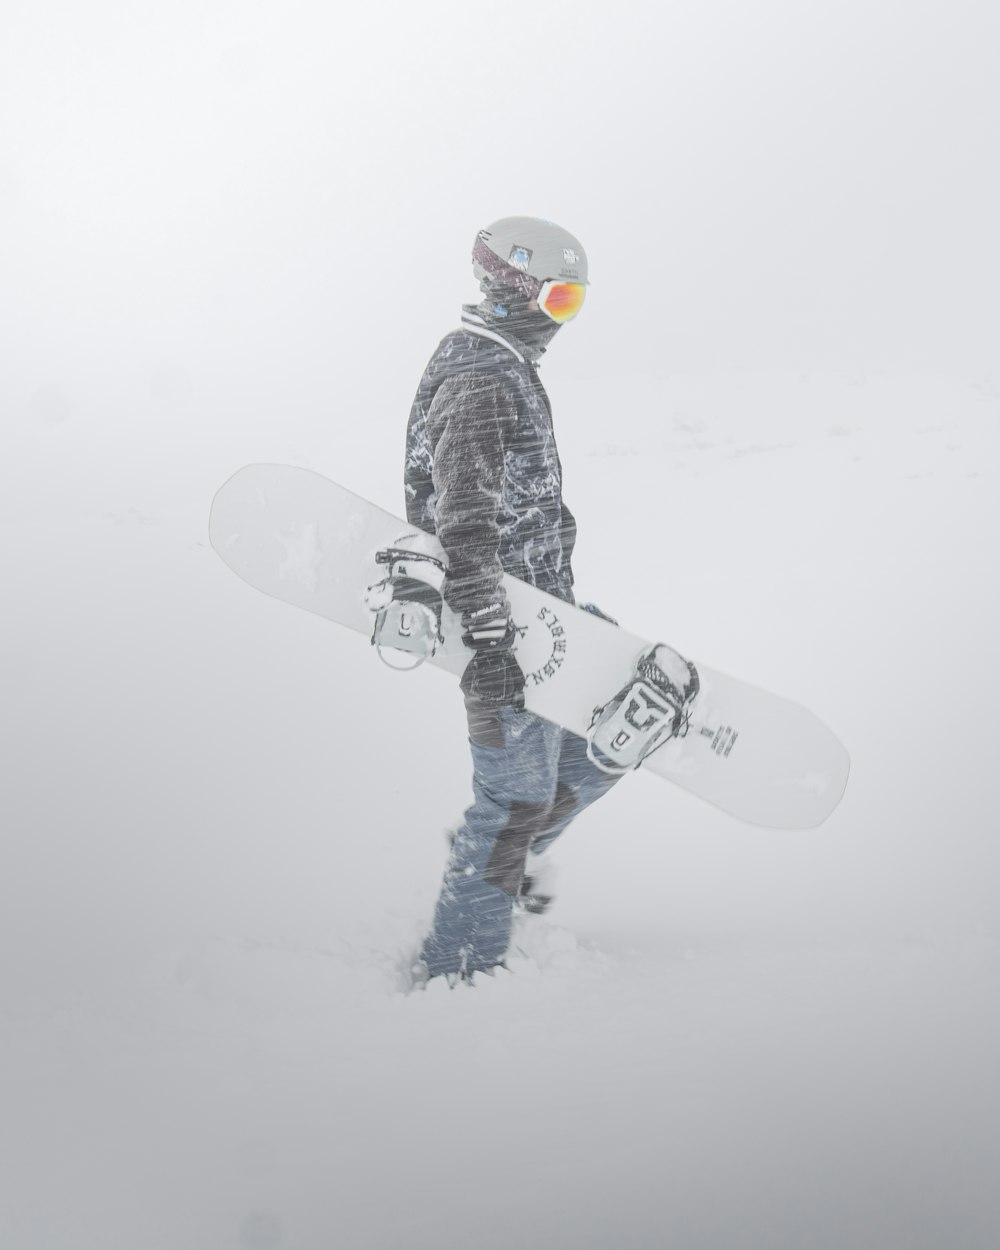 person in black and white pants and black snow shoes standing on snow covered ground during